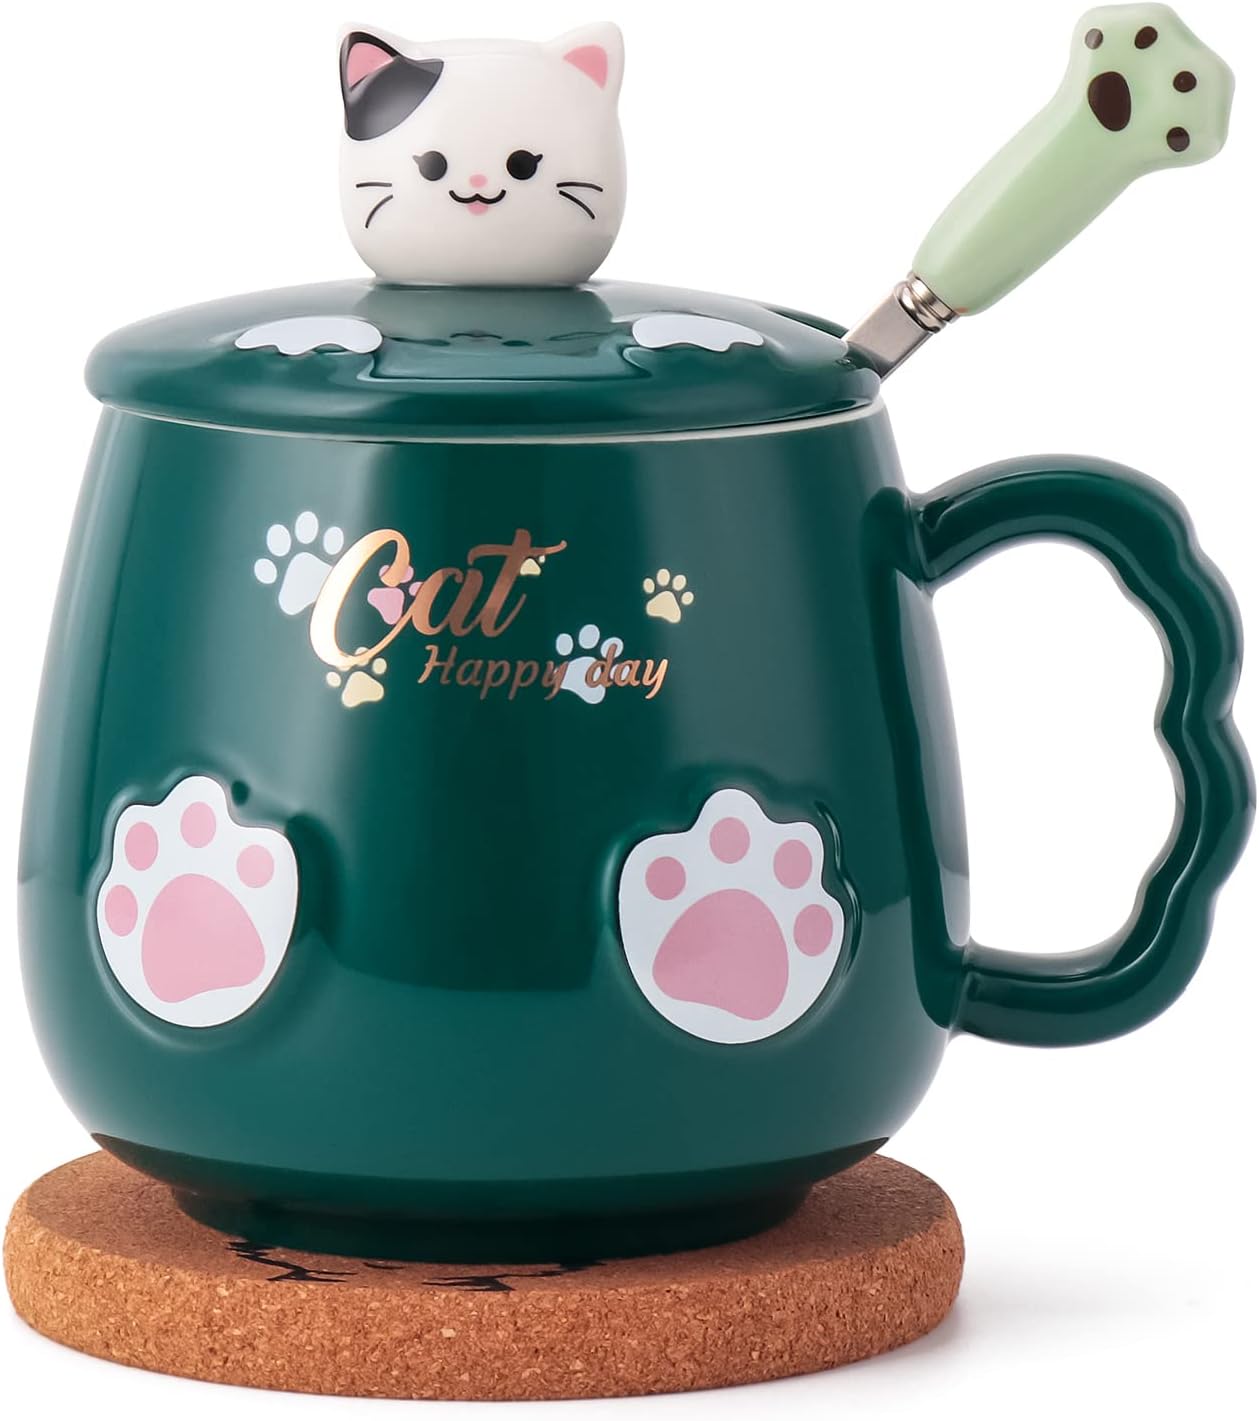 Cat Mug Cute Ceramic Coffee Cup with Lovely Kitty Lid, Kawaii Cat Claw Spoon, Anime Cat Coaster, Novelty Cat Things Birthday Christmas Mug Gift for Cat Lovers 400ML